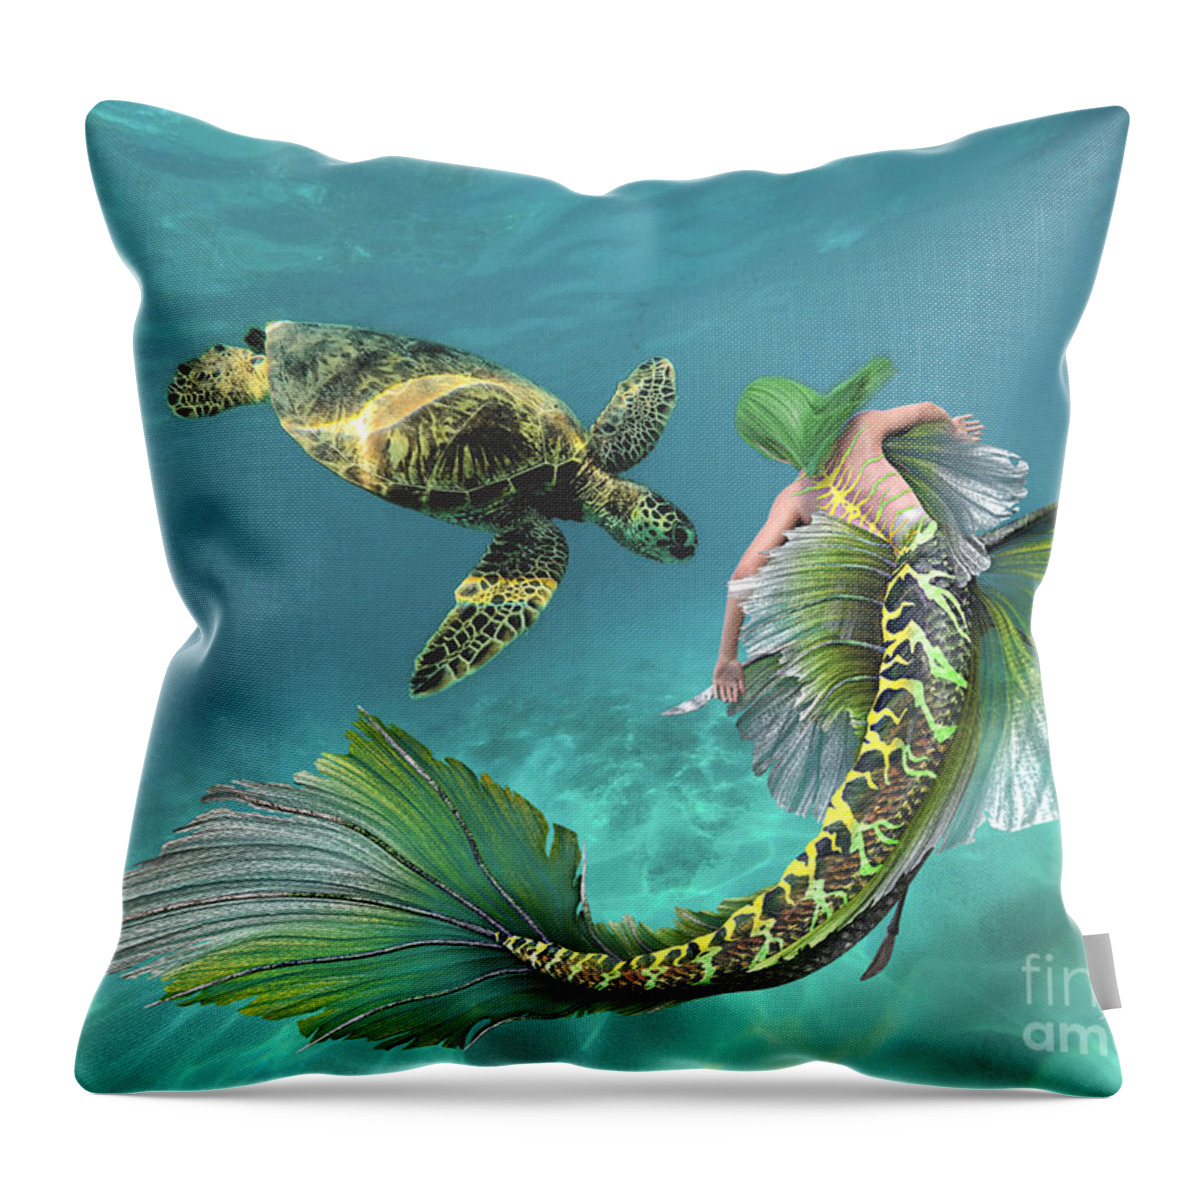 Mermaid Throw Pillow featuring the digital art Dance With Me by Morag Bates